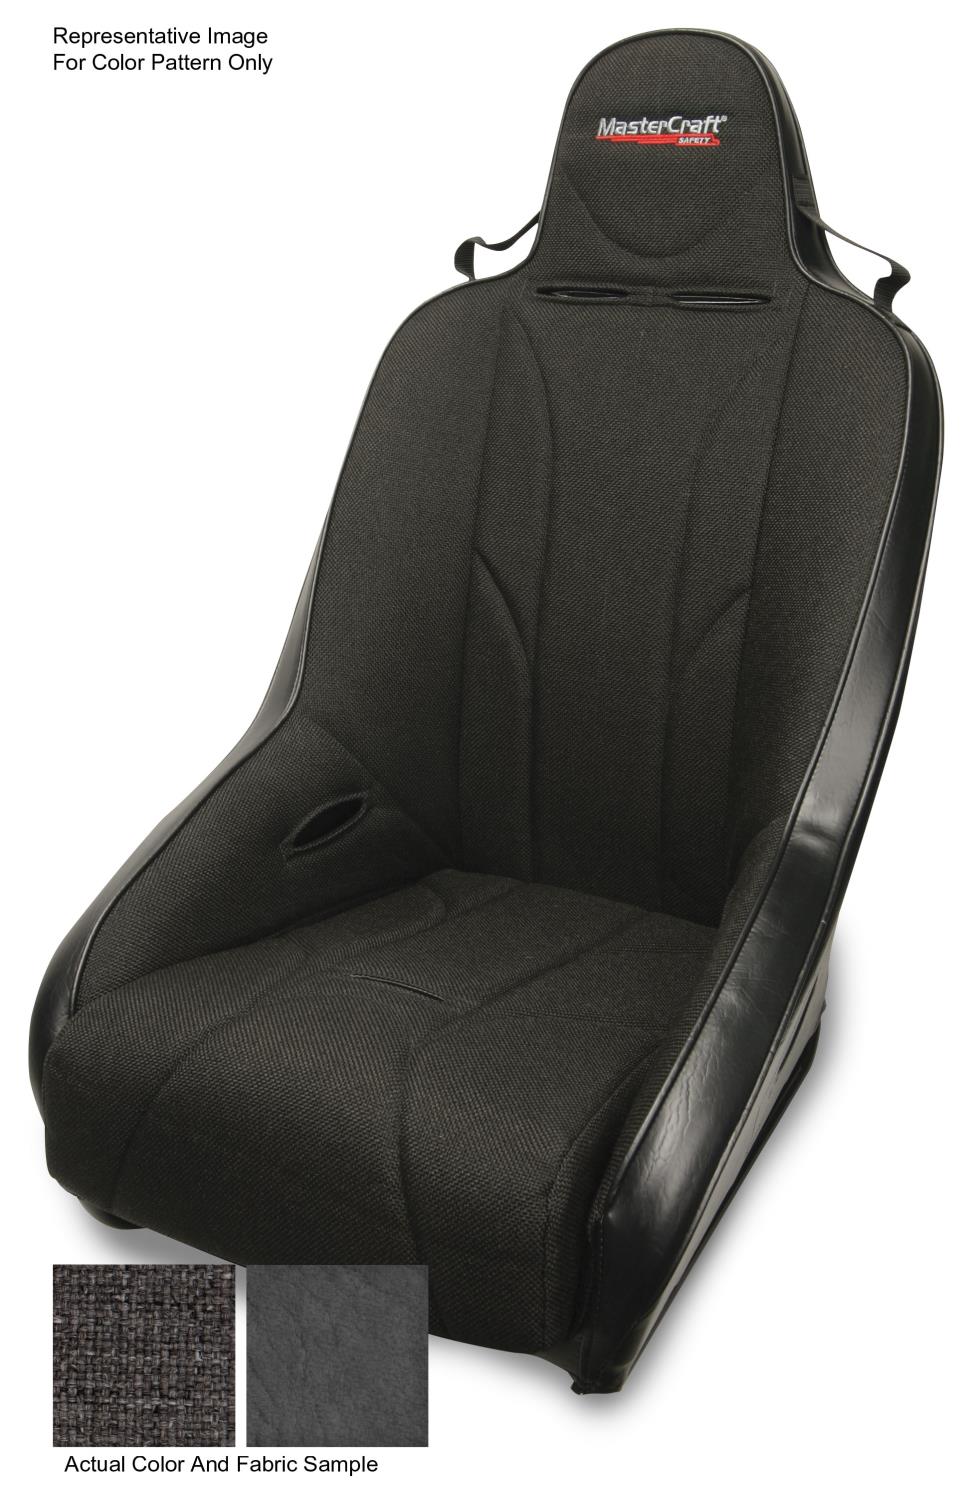 561119 1 in. WIDER PROSeat w/Fixed Headrest, Smoke Gray with Heather Gray Removable Cushion, Heather Side Panels, Smoke Band